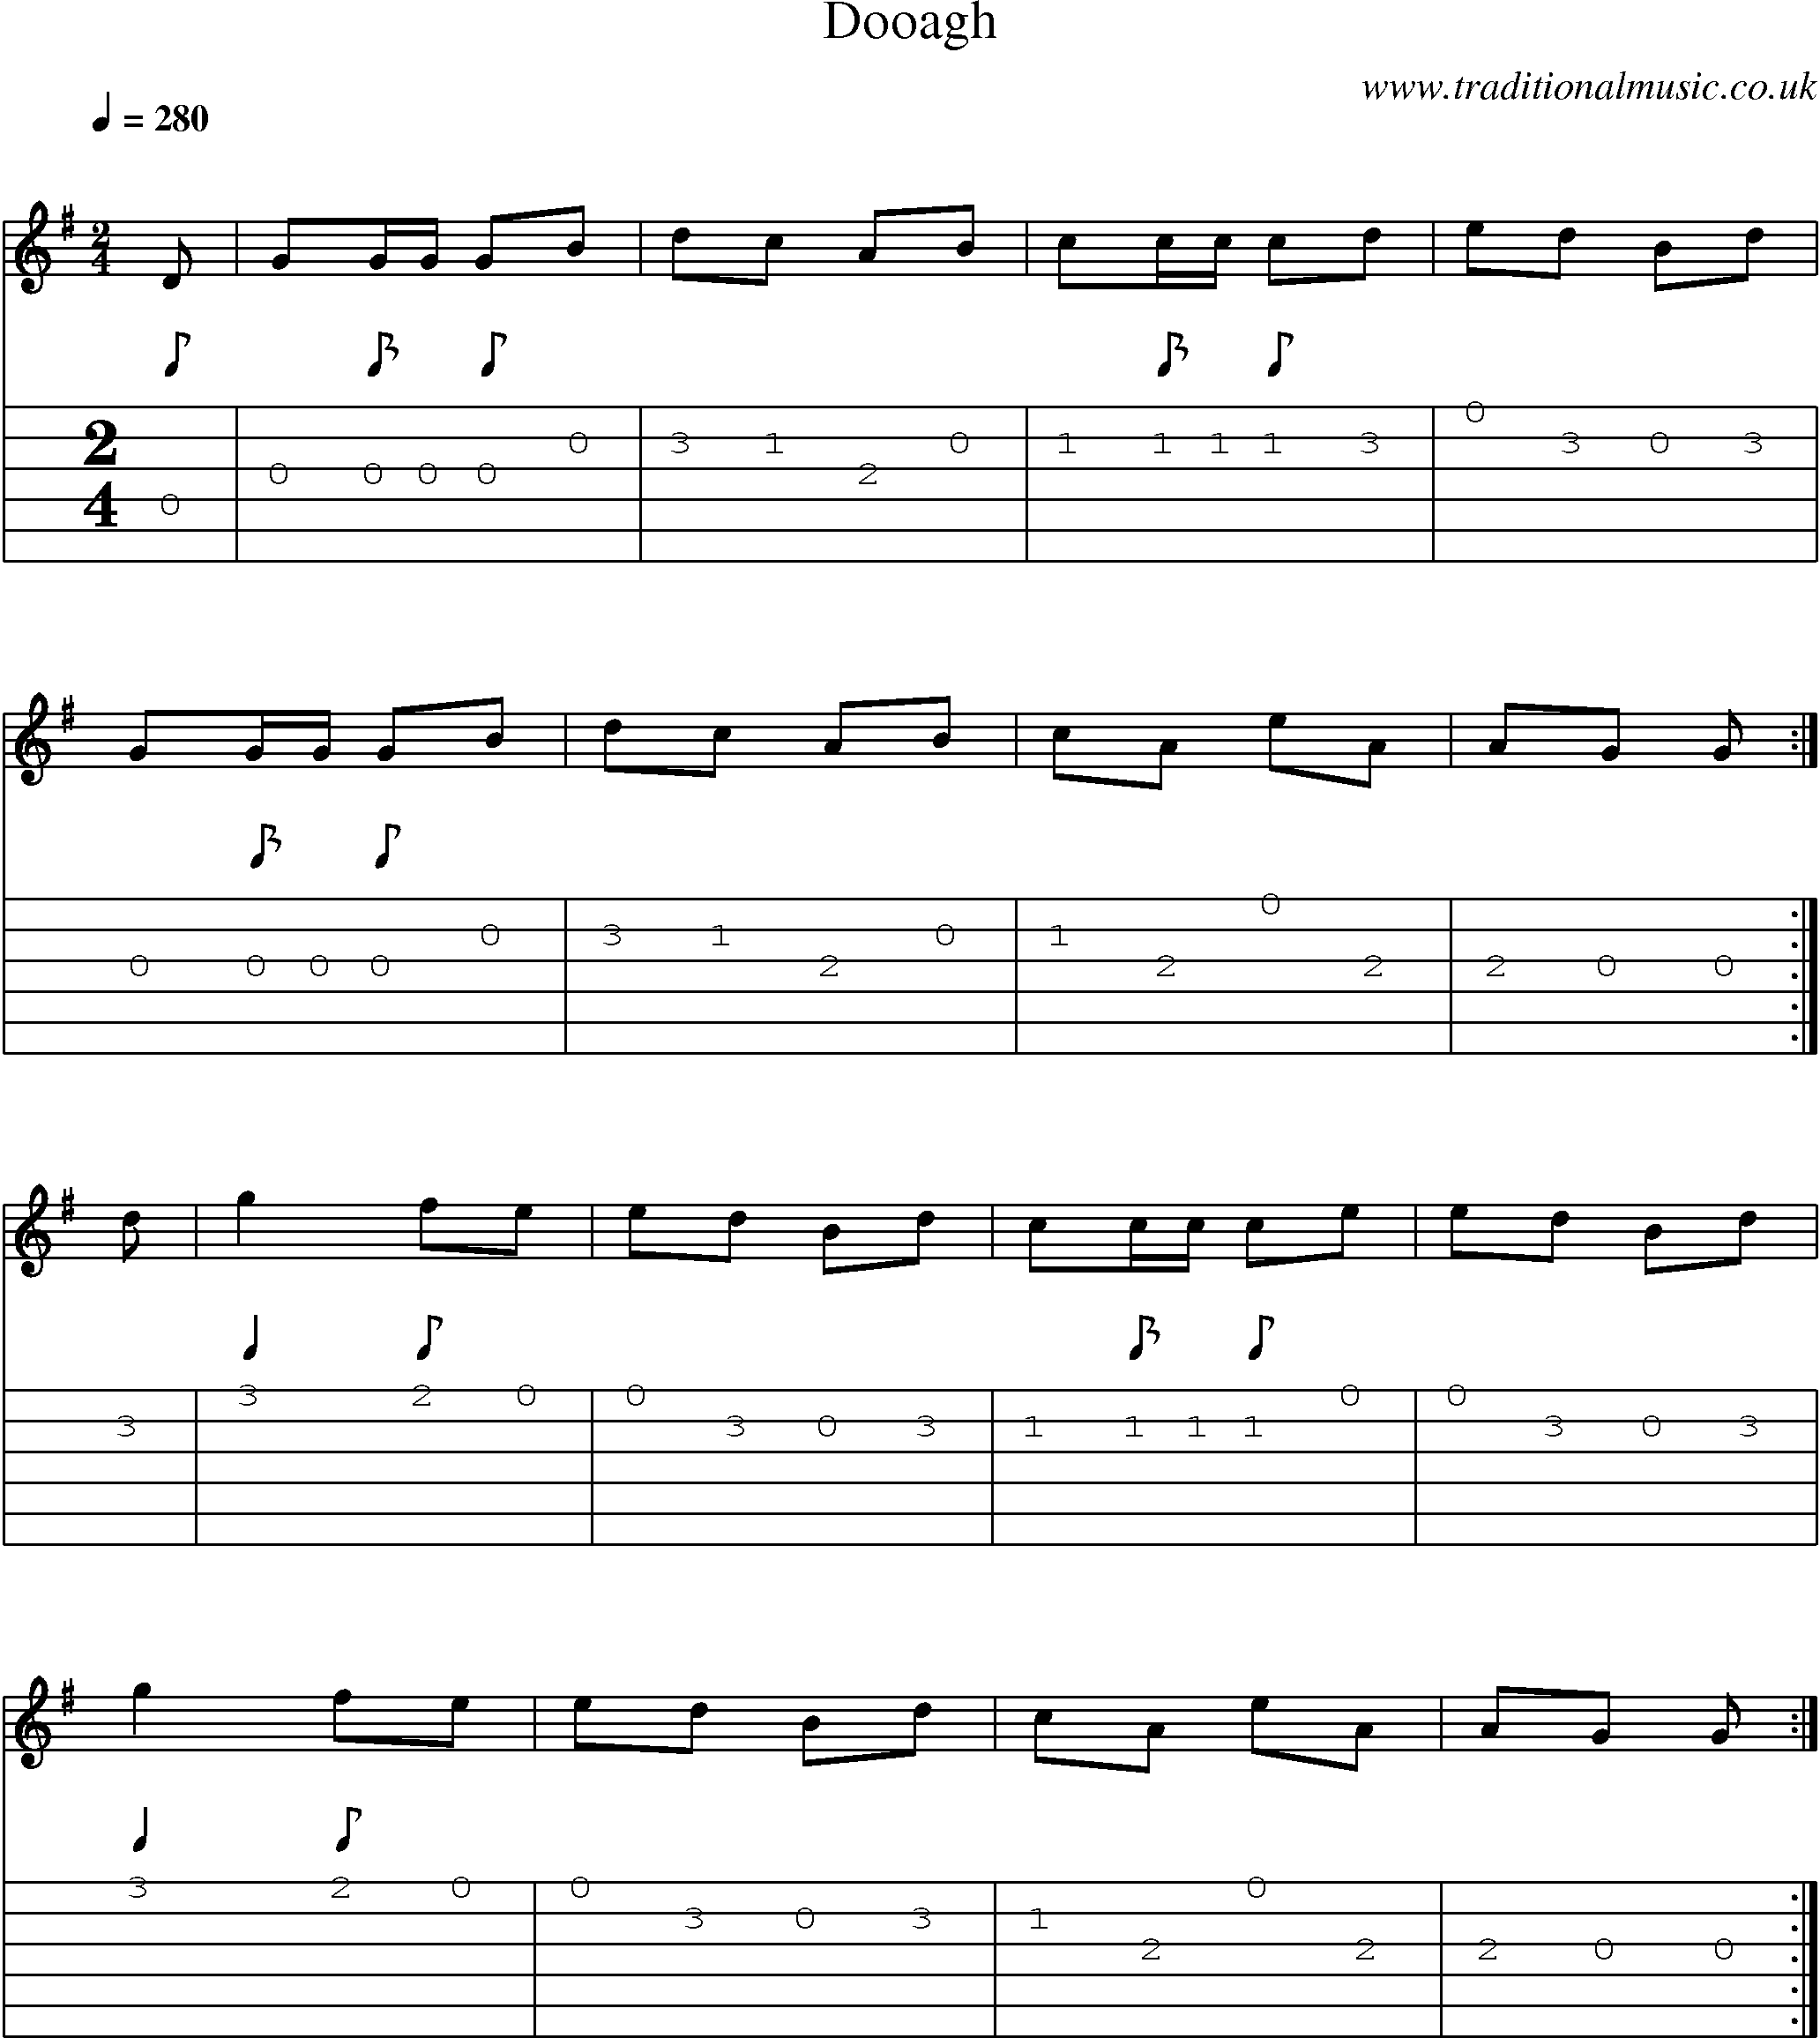 Music Score and Guitar Tabs for Dooagh